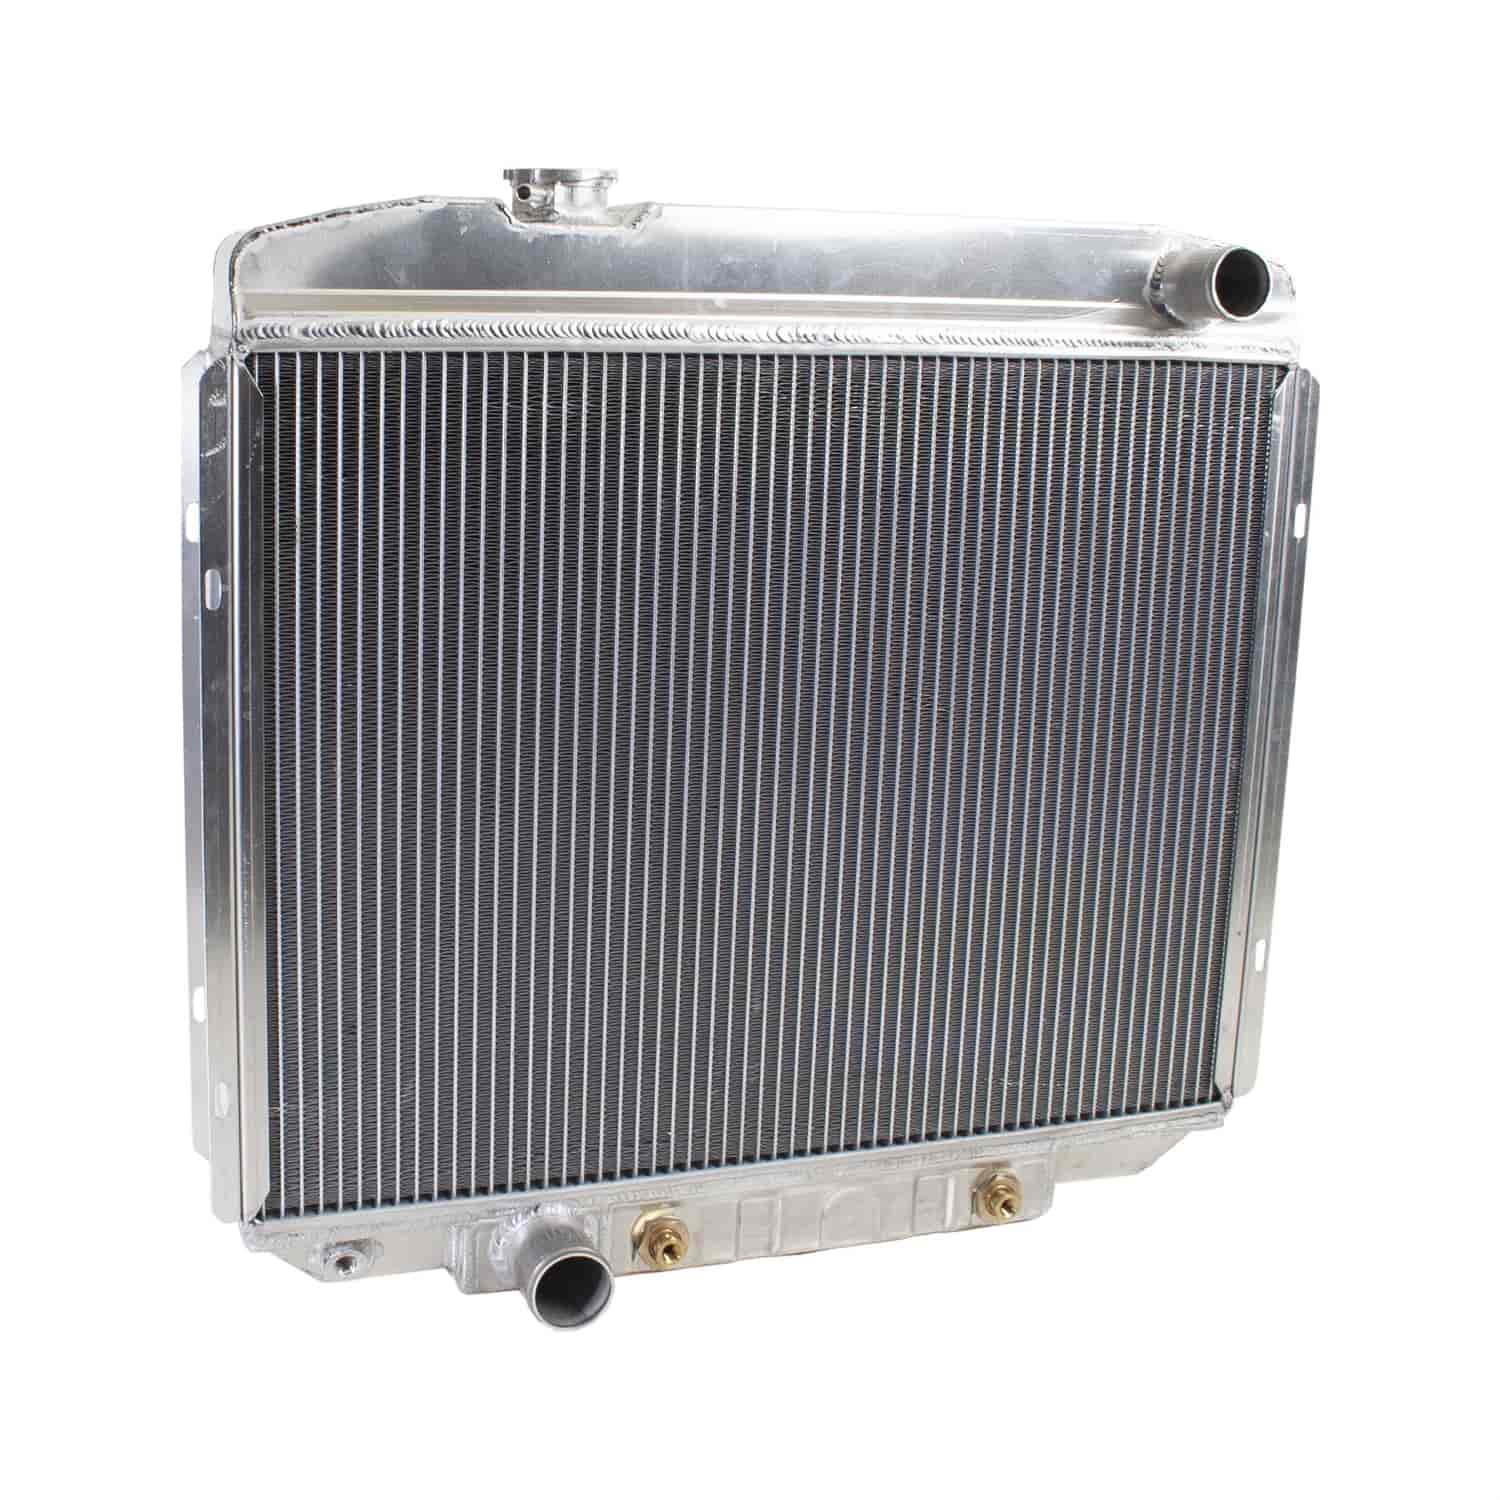 ExactFit Radiator for 1965-1966 Galaxie with Late Ford Small Block, Big Block, & FE